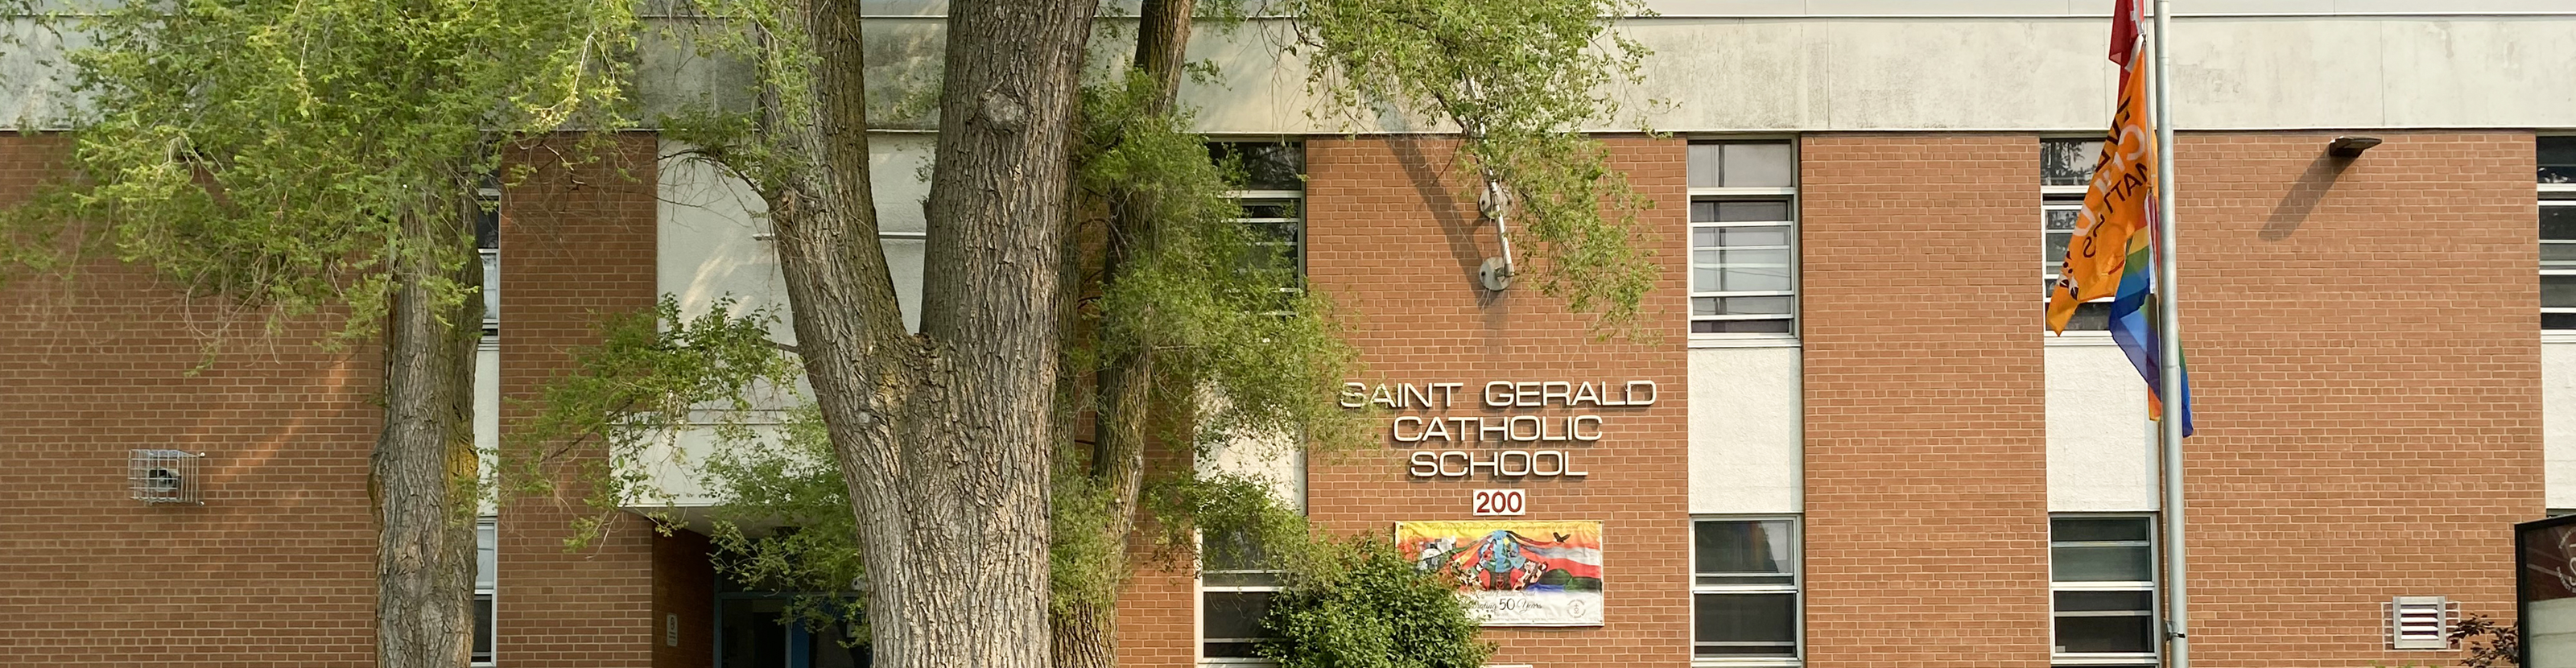 The front of the  St. Gerald Catholic School building.